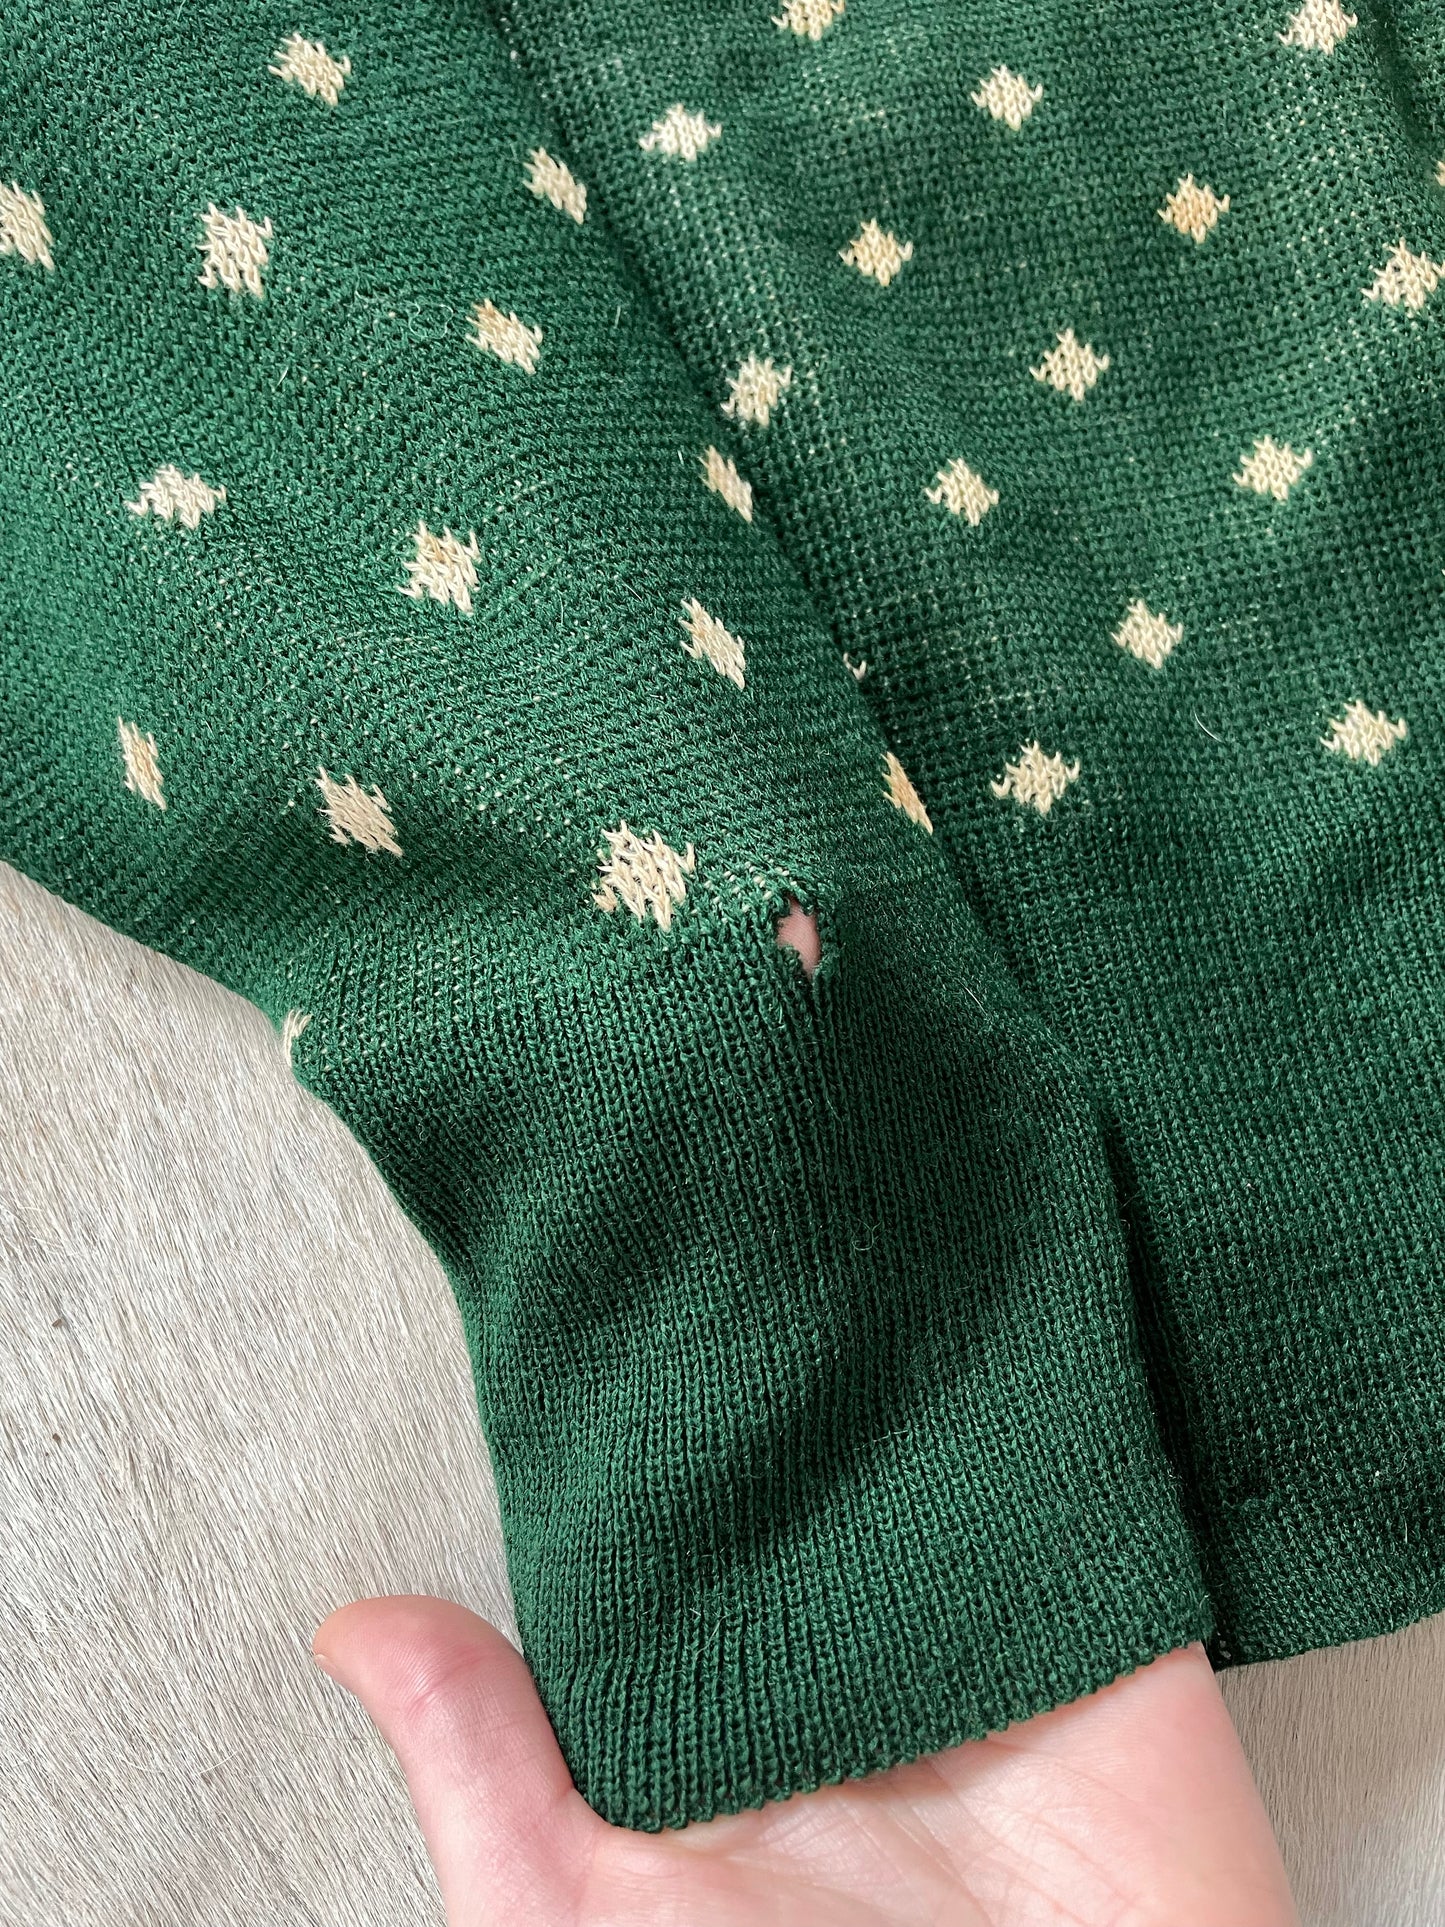 40s/50s Holiday Reindeer Sweater